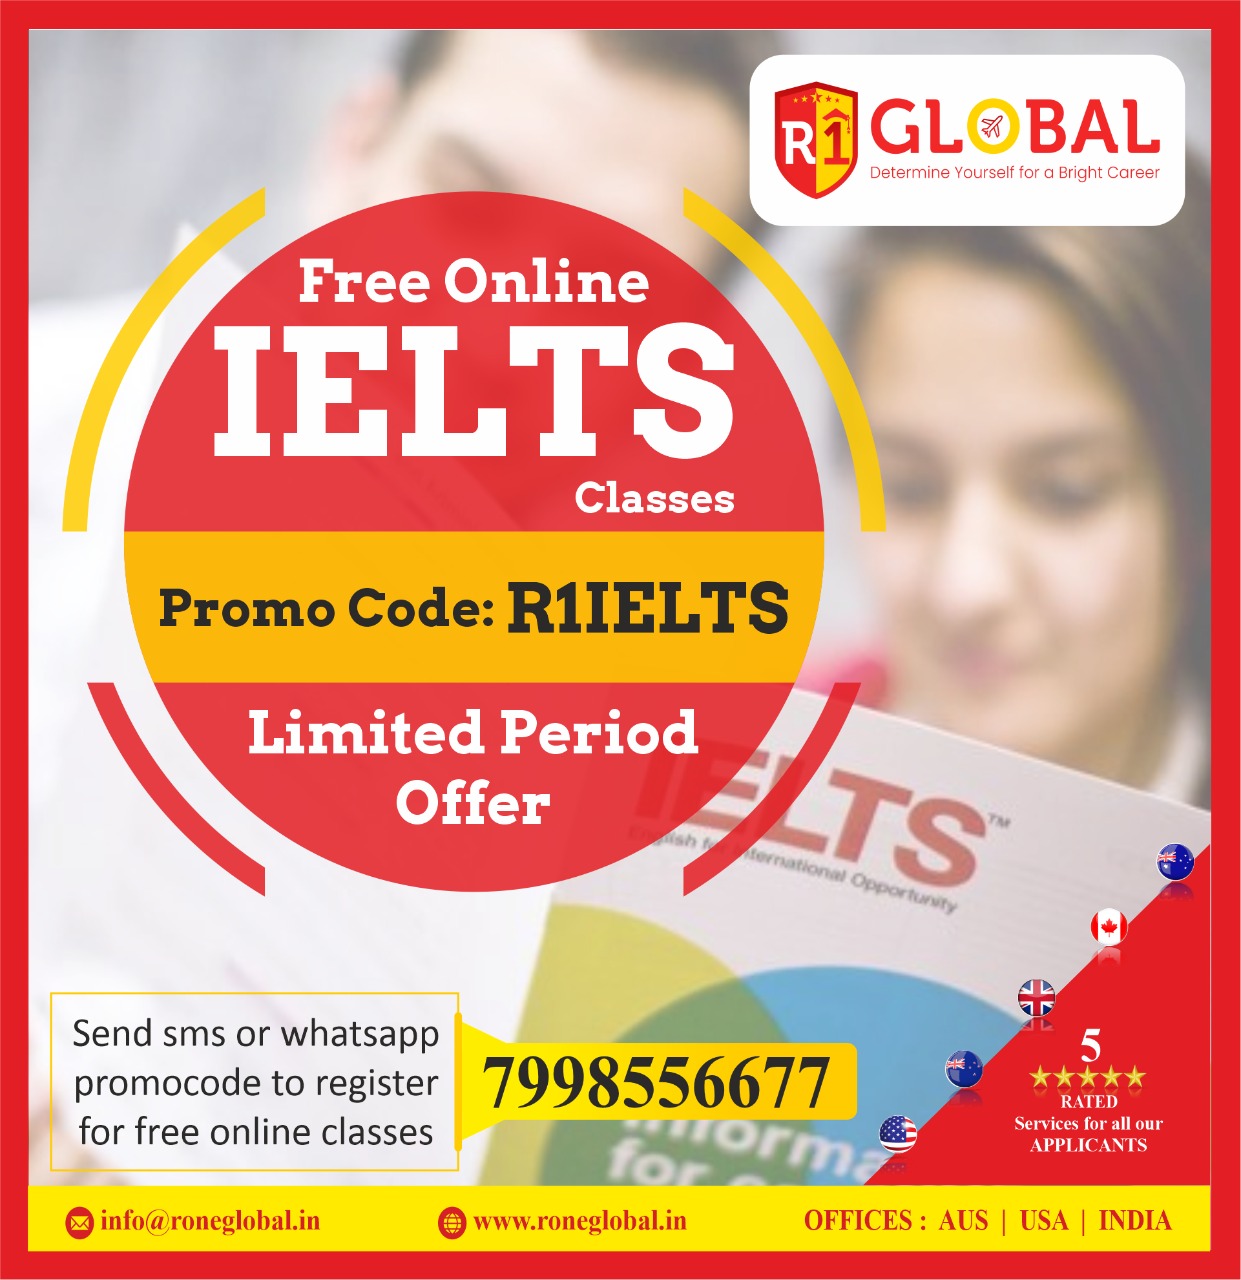 Free Online IELTS Classes, Limited Period Offer with Promo Code: R1IELTS